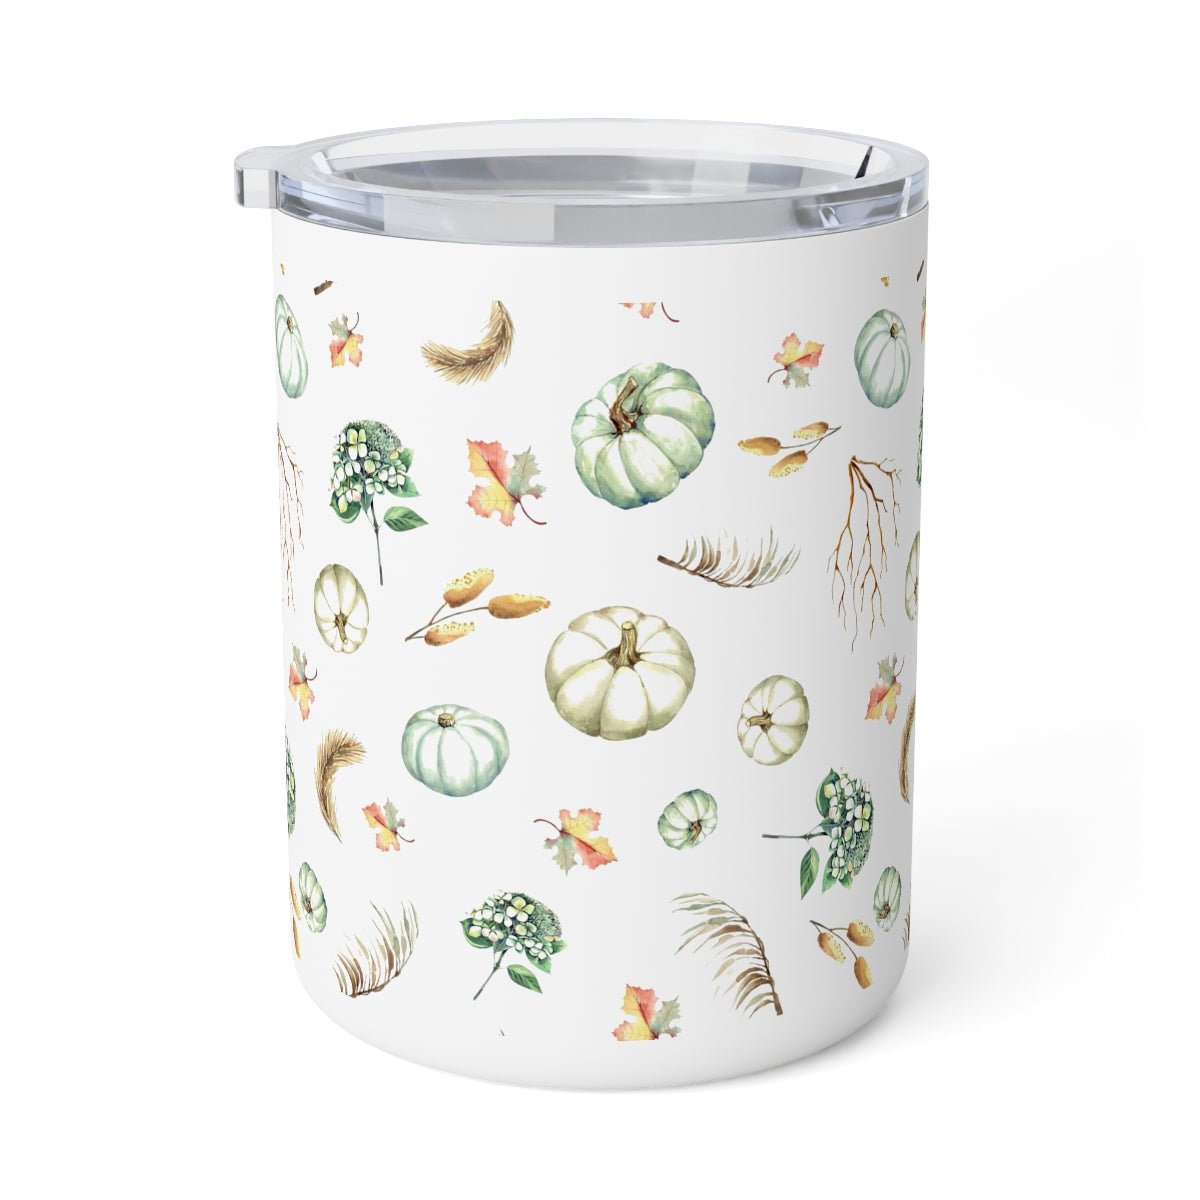 Fall Pumpkins and Leaves Insulated Coffee Mug, 10oz - Puffin Lime